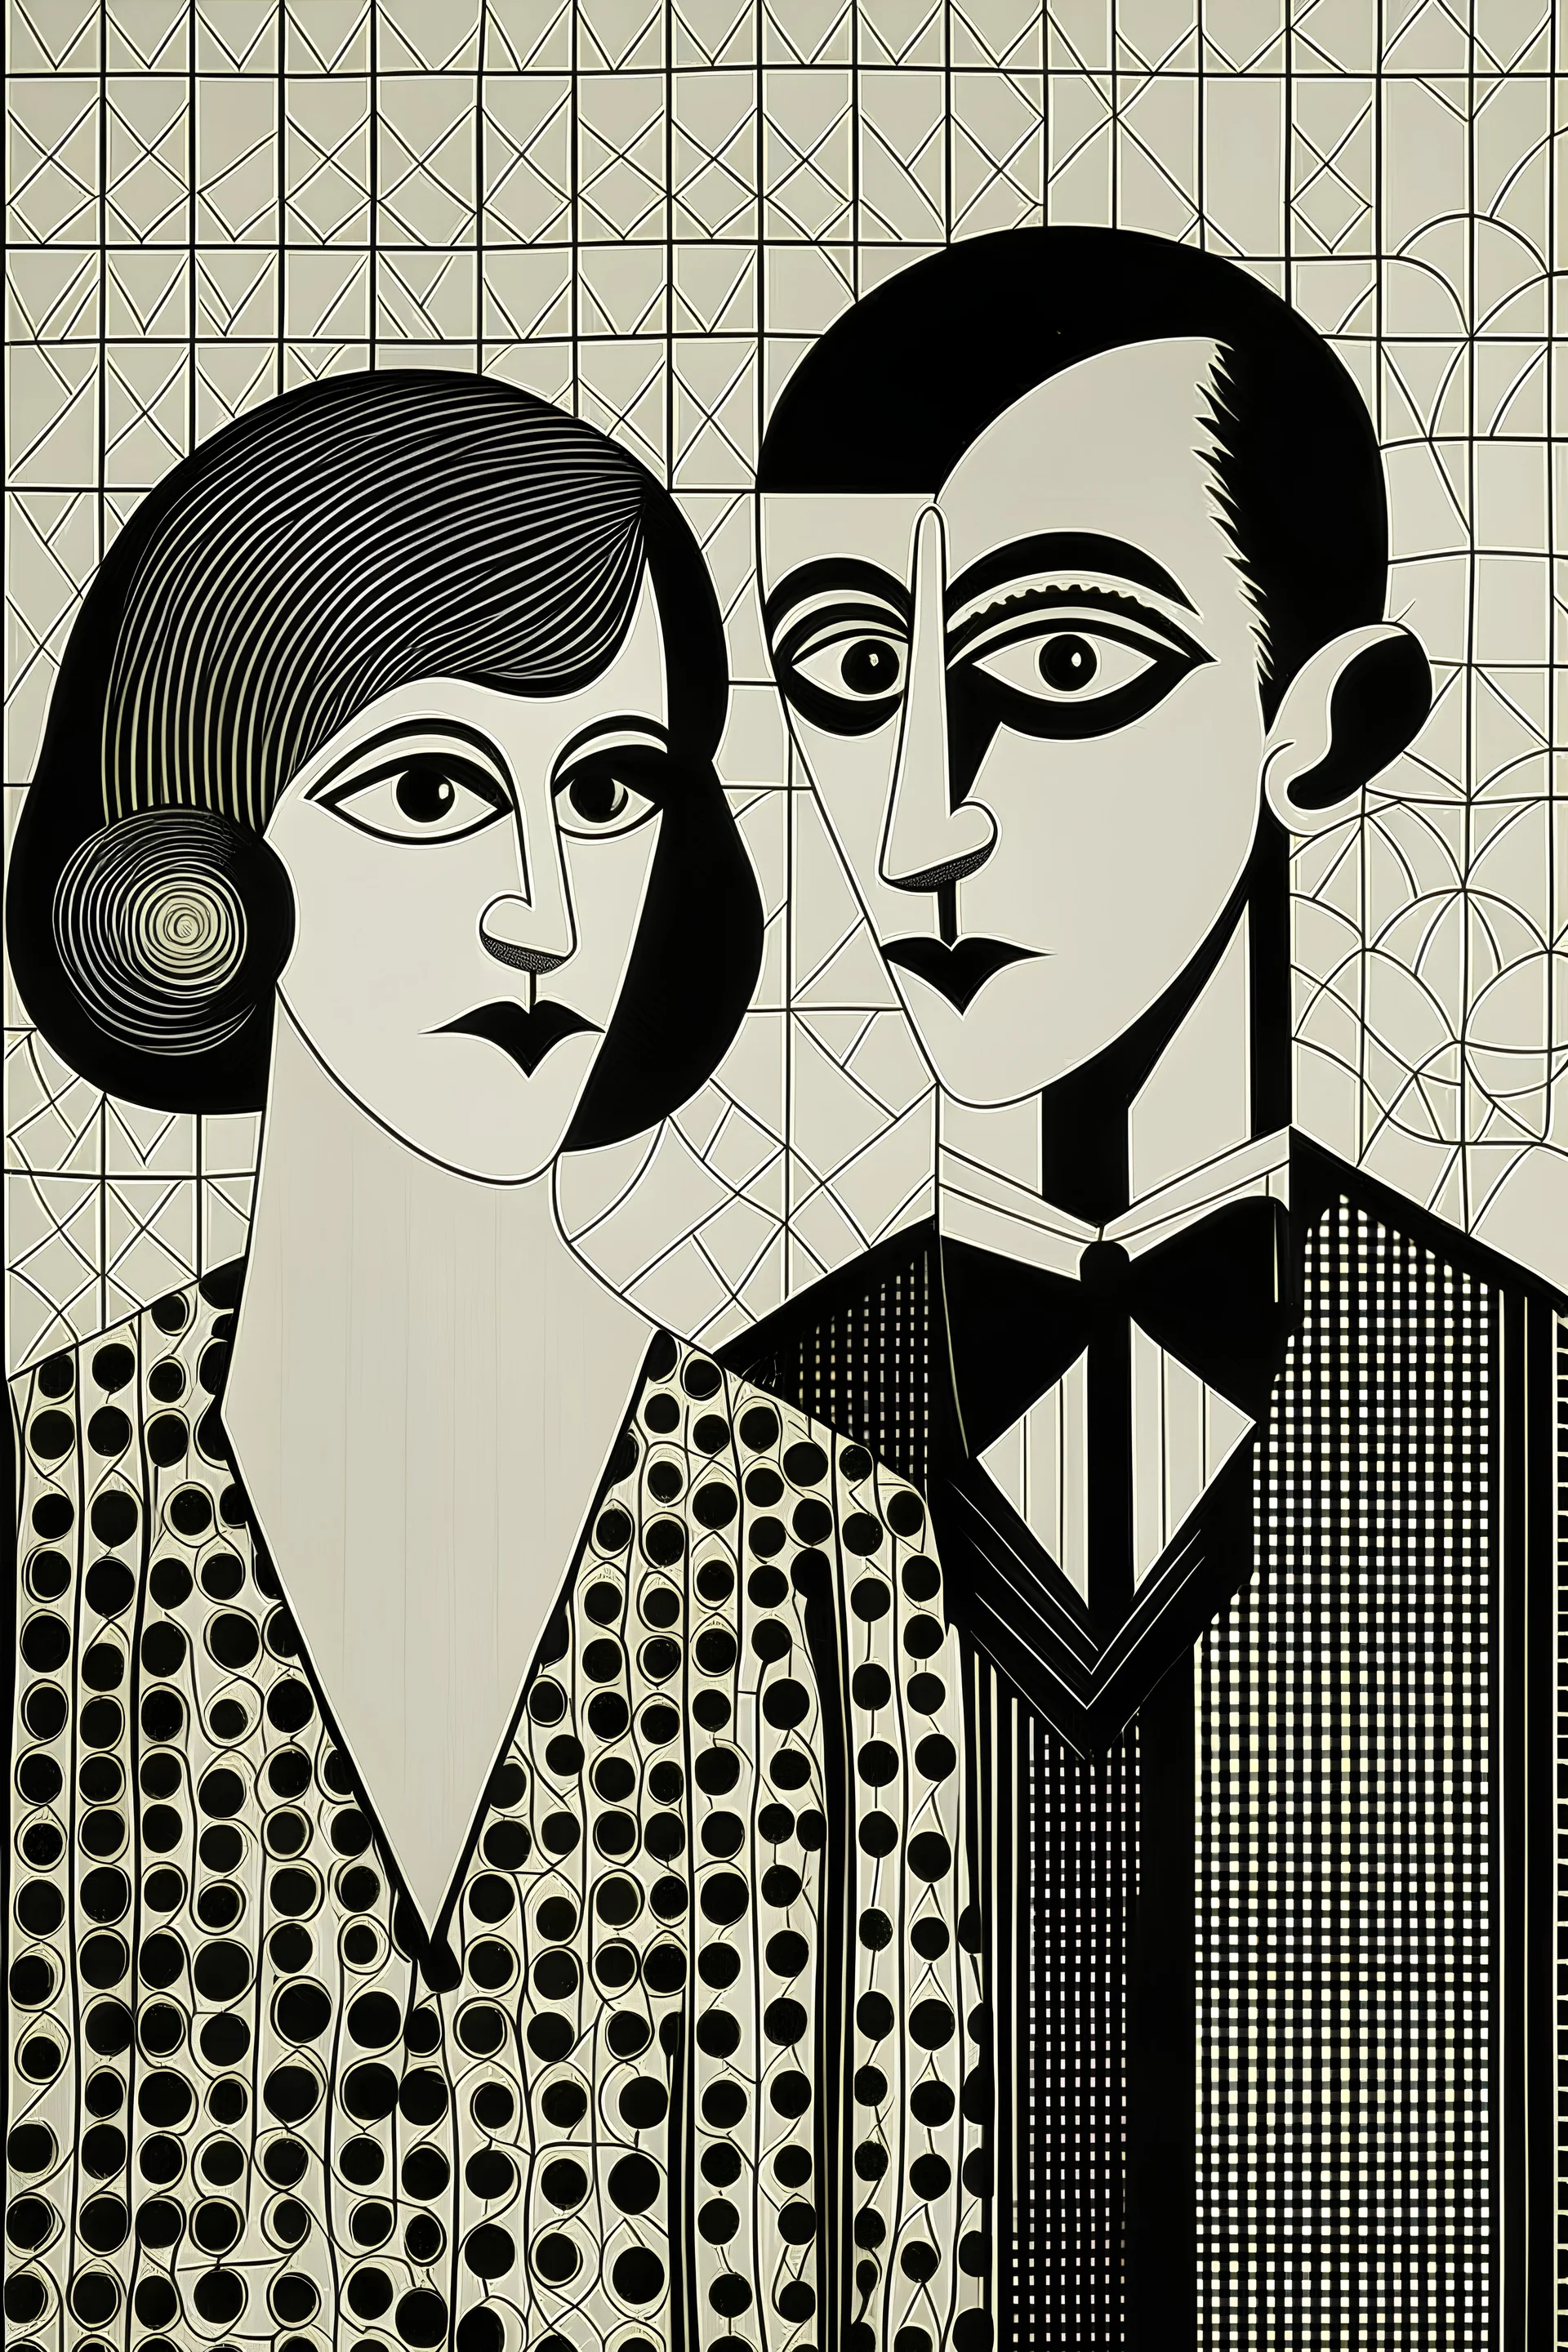 the minimalistic black and white picture from 1920 of two clowns: man and a woman with a short hair. at stencil surrealism Art